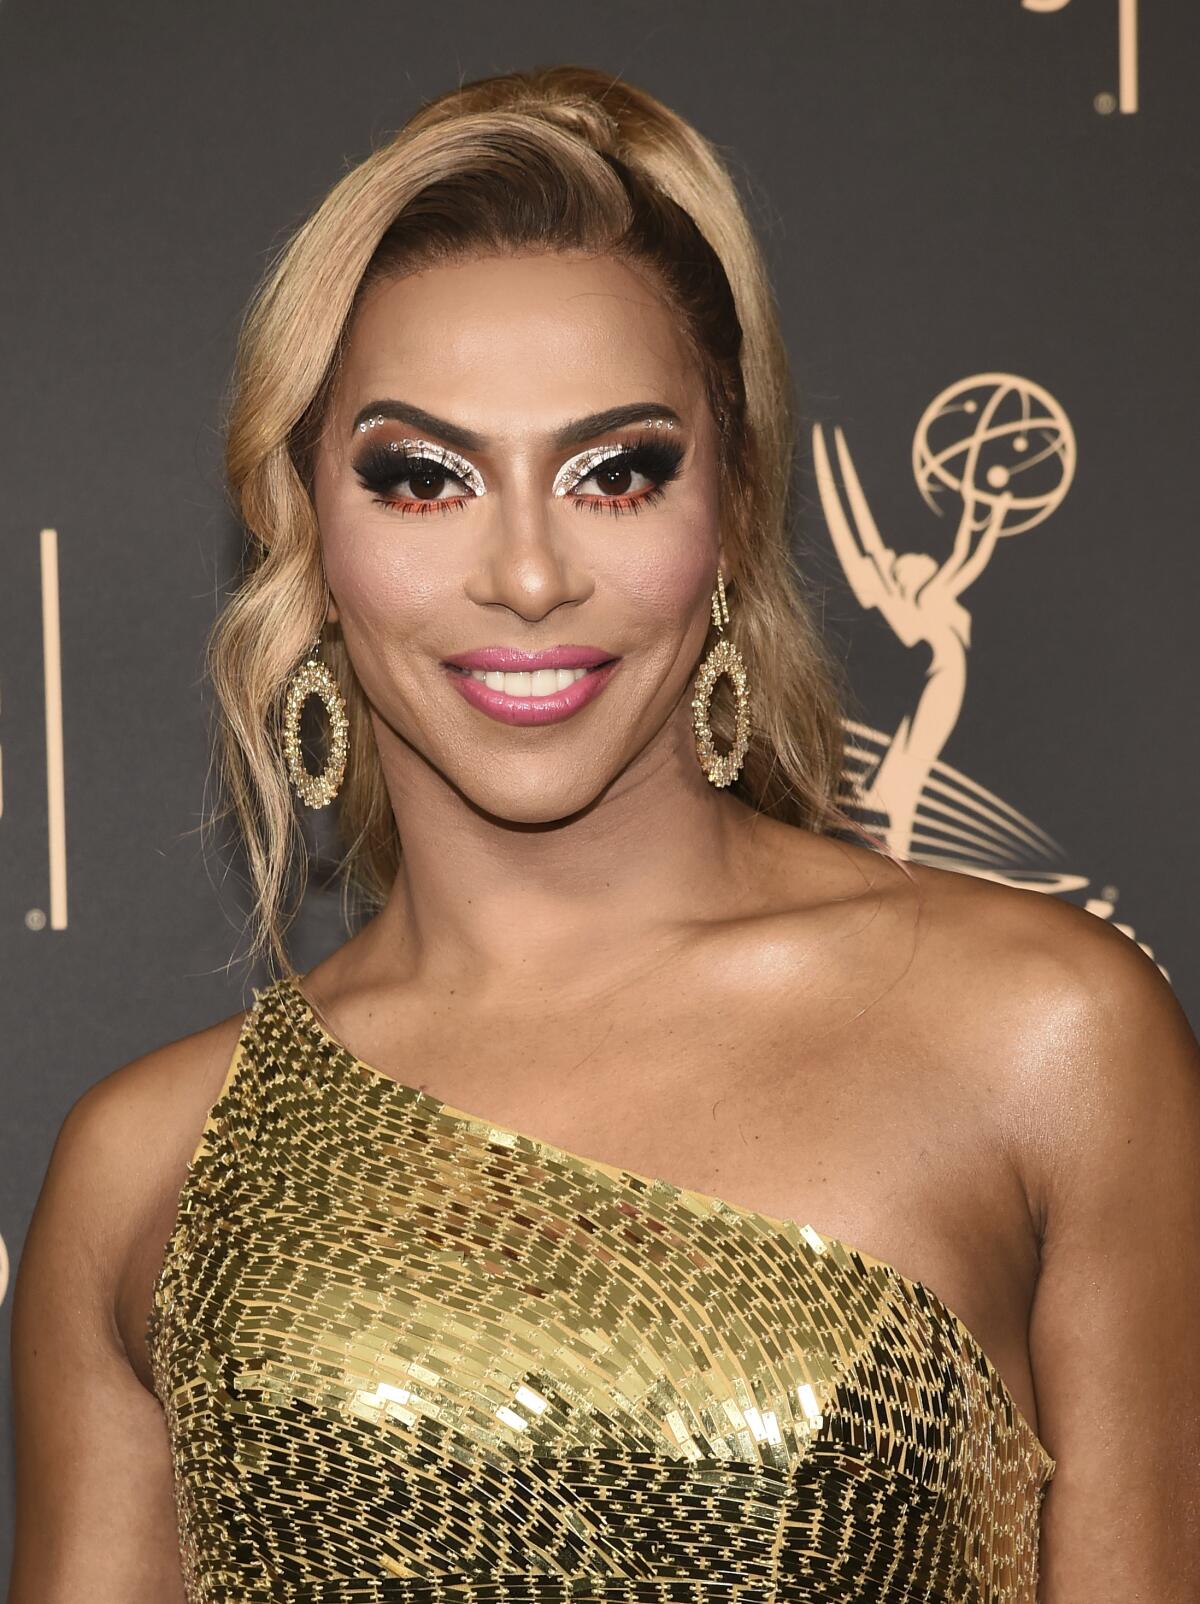 Dancing With the Stars' Welcomes Shangela as Its First Drag Queen